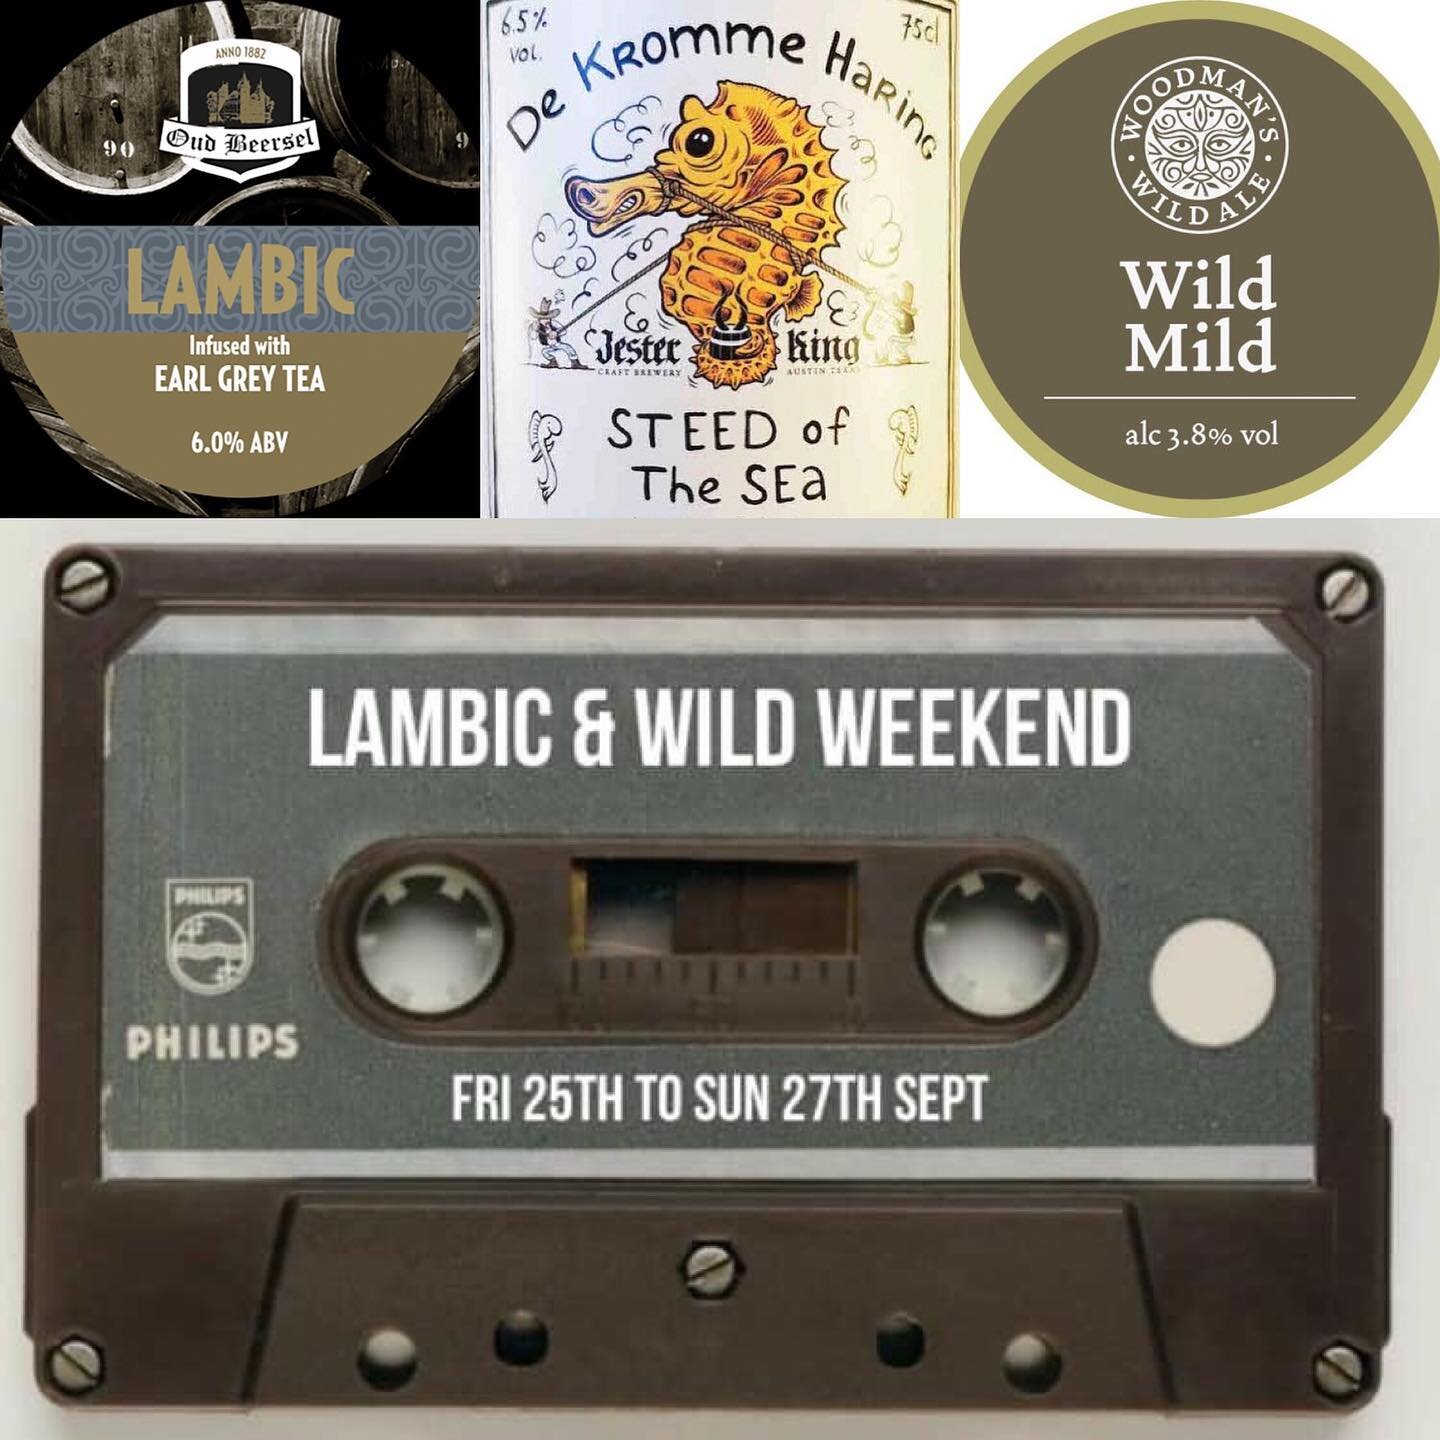 All the beers are on and pouring though the Wild Mild is a little wildly lively! 

Oud Beersel - Earl Grey Lambic 6%
Gorgeous bergamot orange kicks and balanced acidity.
.
Kromme Haring x Jester King - Steed of the Sea 6.5%
Wild ale with Texas lemon 